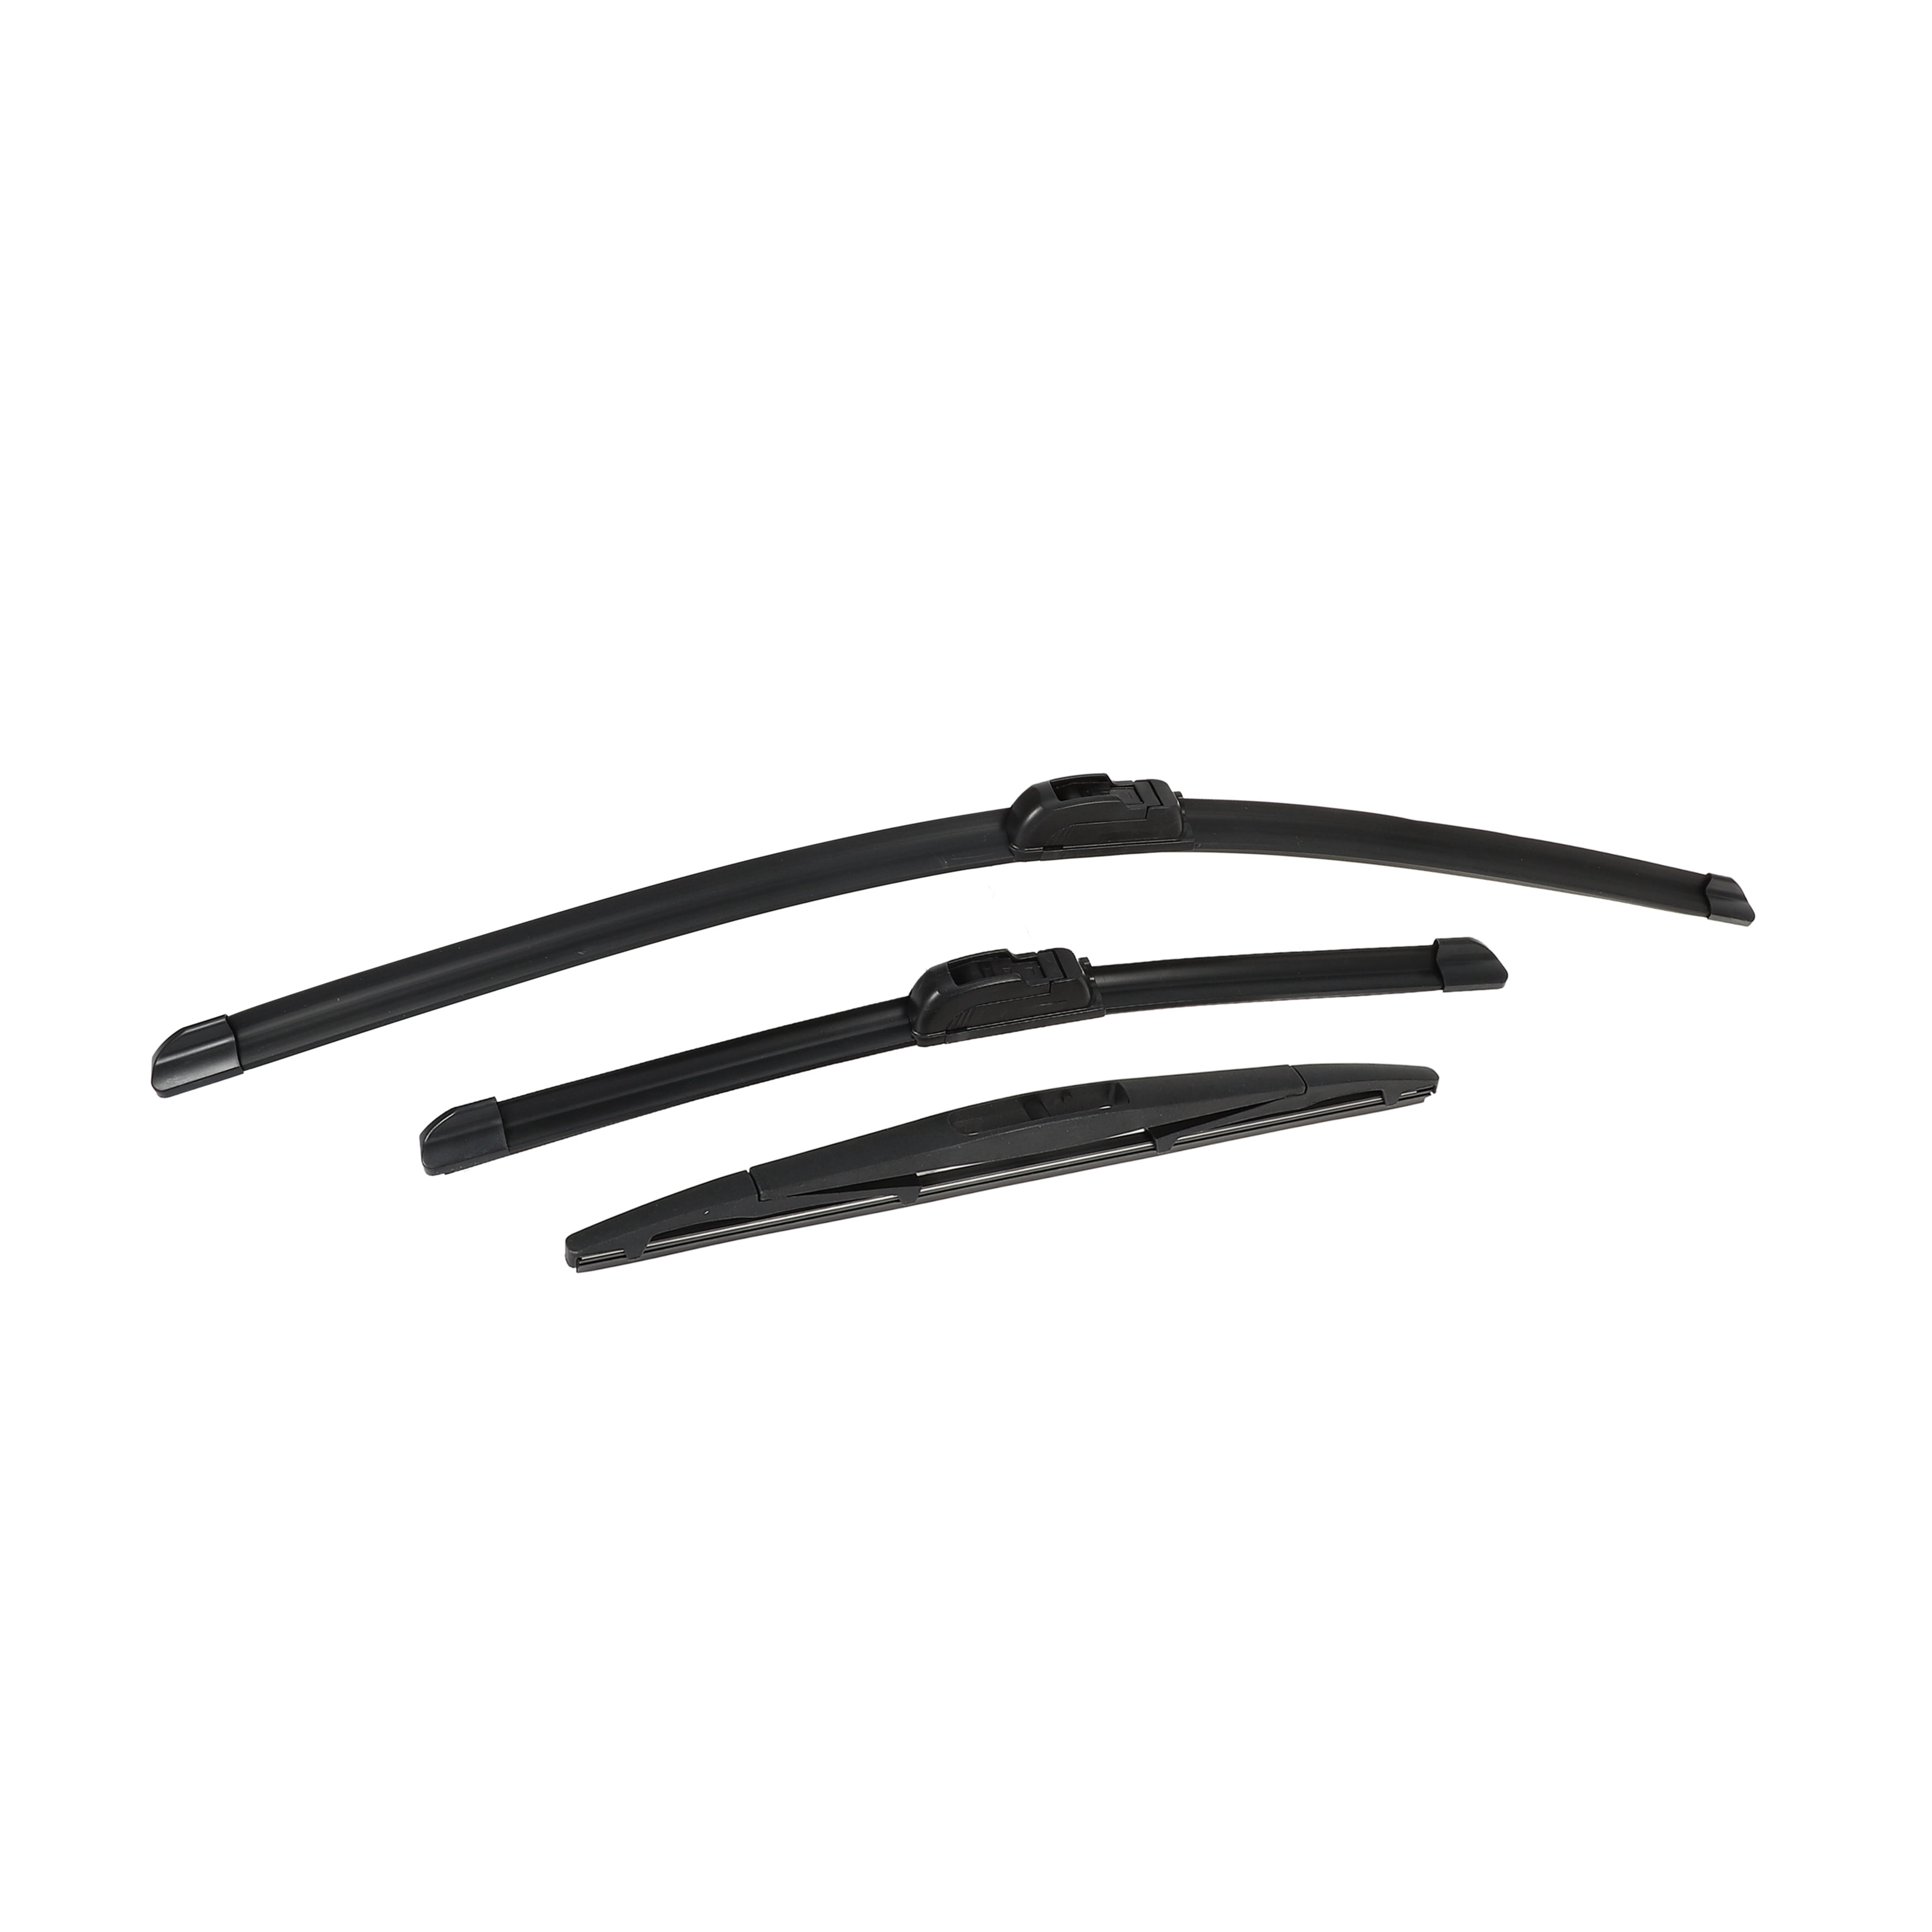 Unique Bargains 3pcs 26 inch 16 inch 14 inch Front Rear Windshield Wiper Blade Set Fit for RDX Black